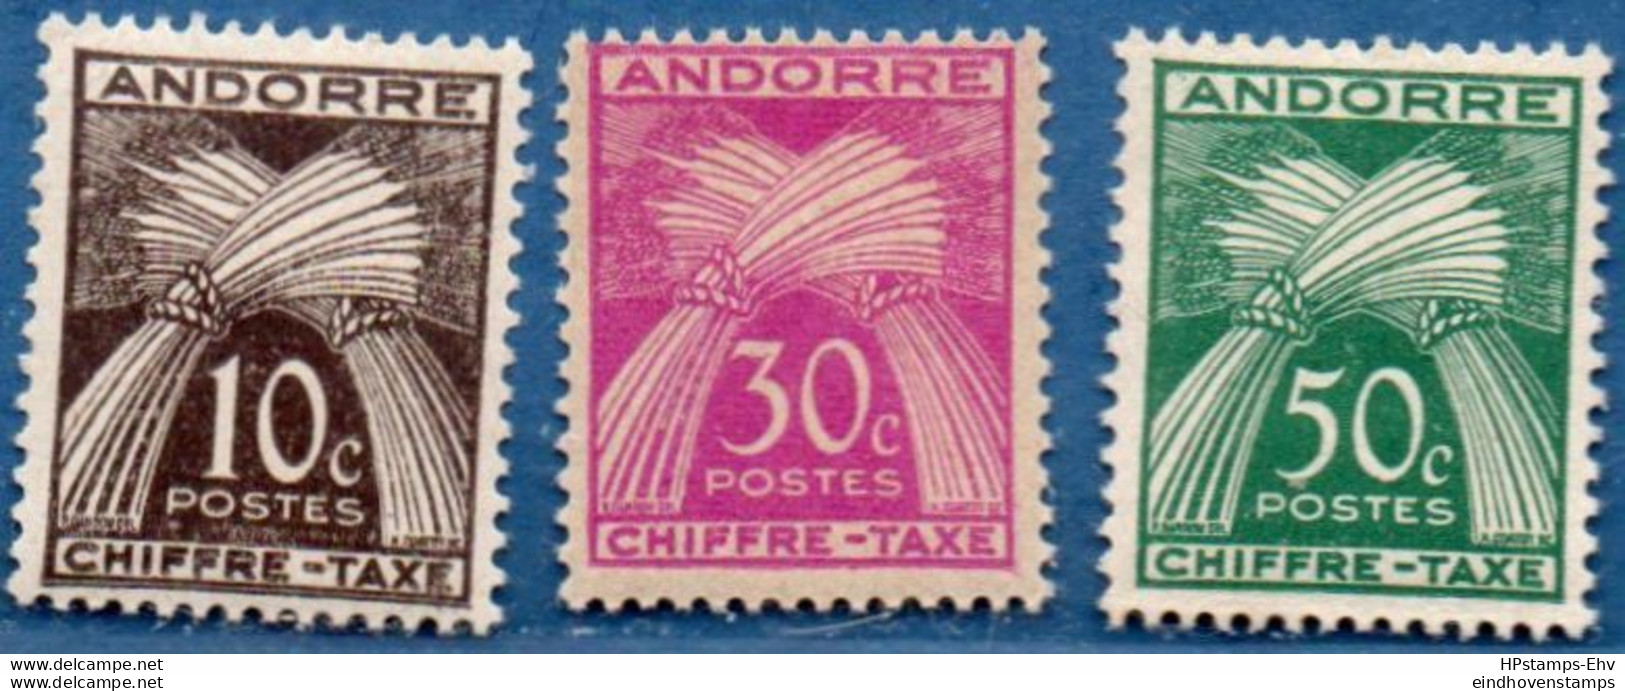 Andorra Fr 1943 Chiffre-Taxe 10, 30 & 50 C  3 Values MH - Unused Stamps